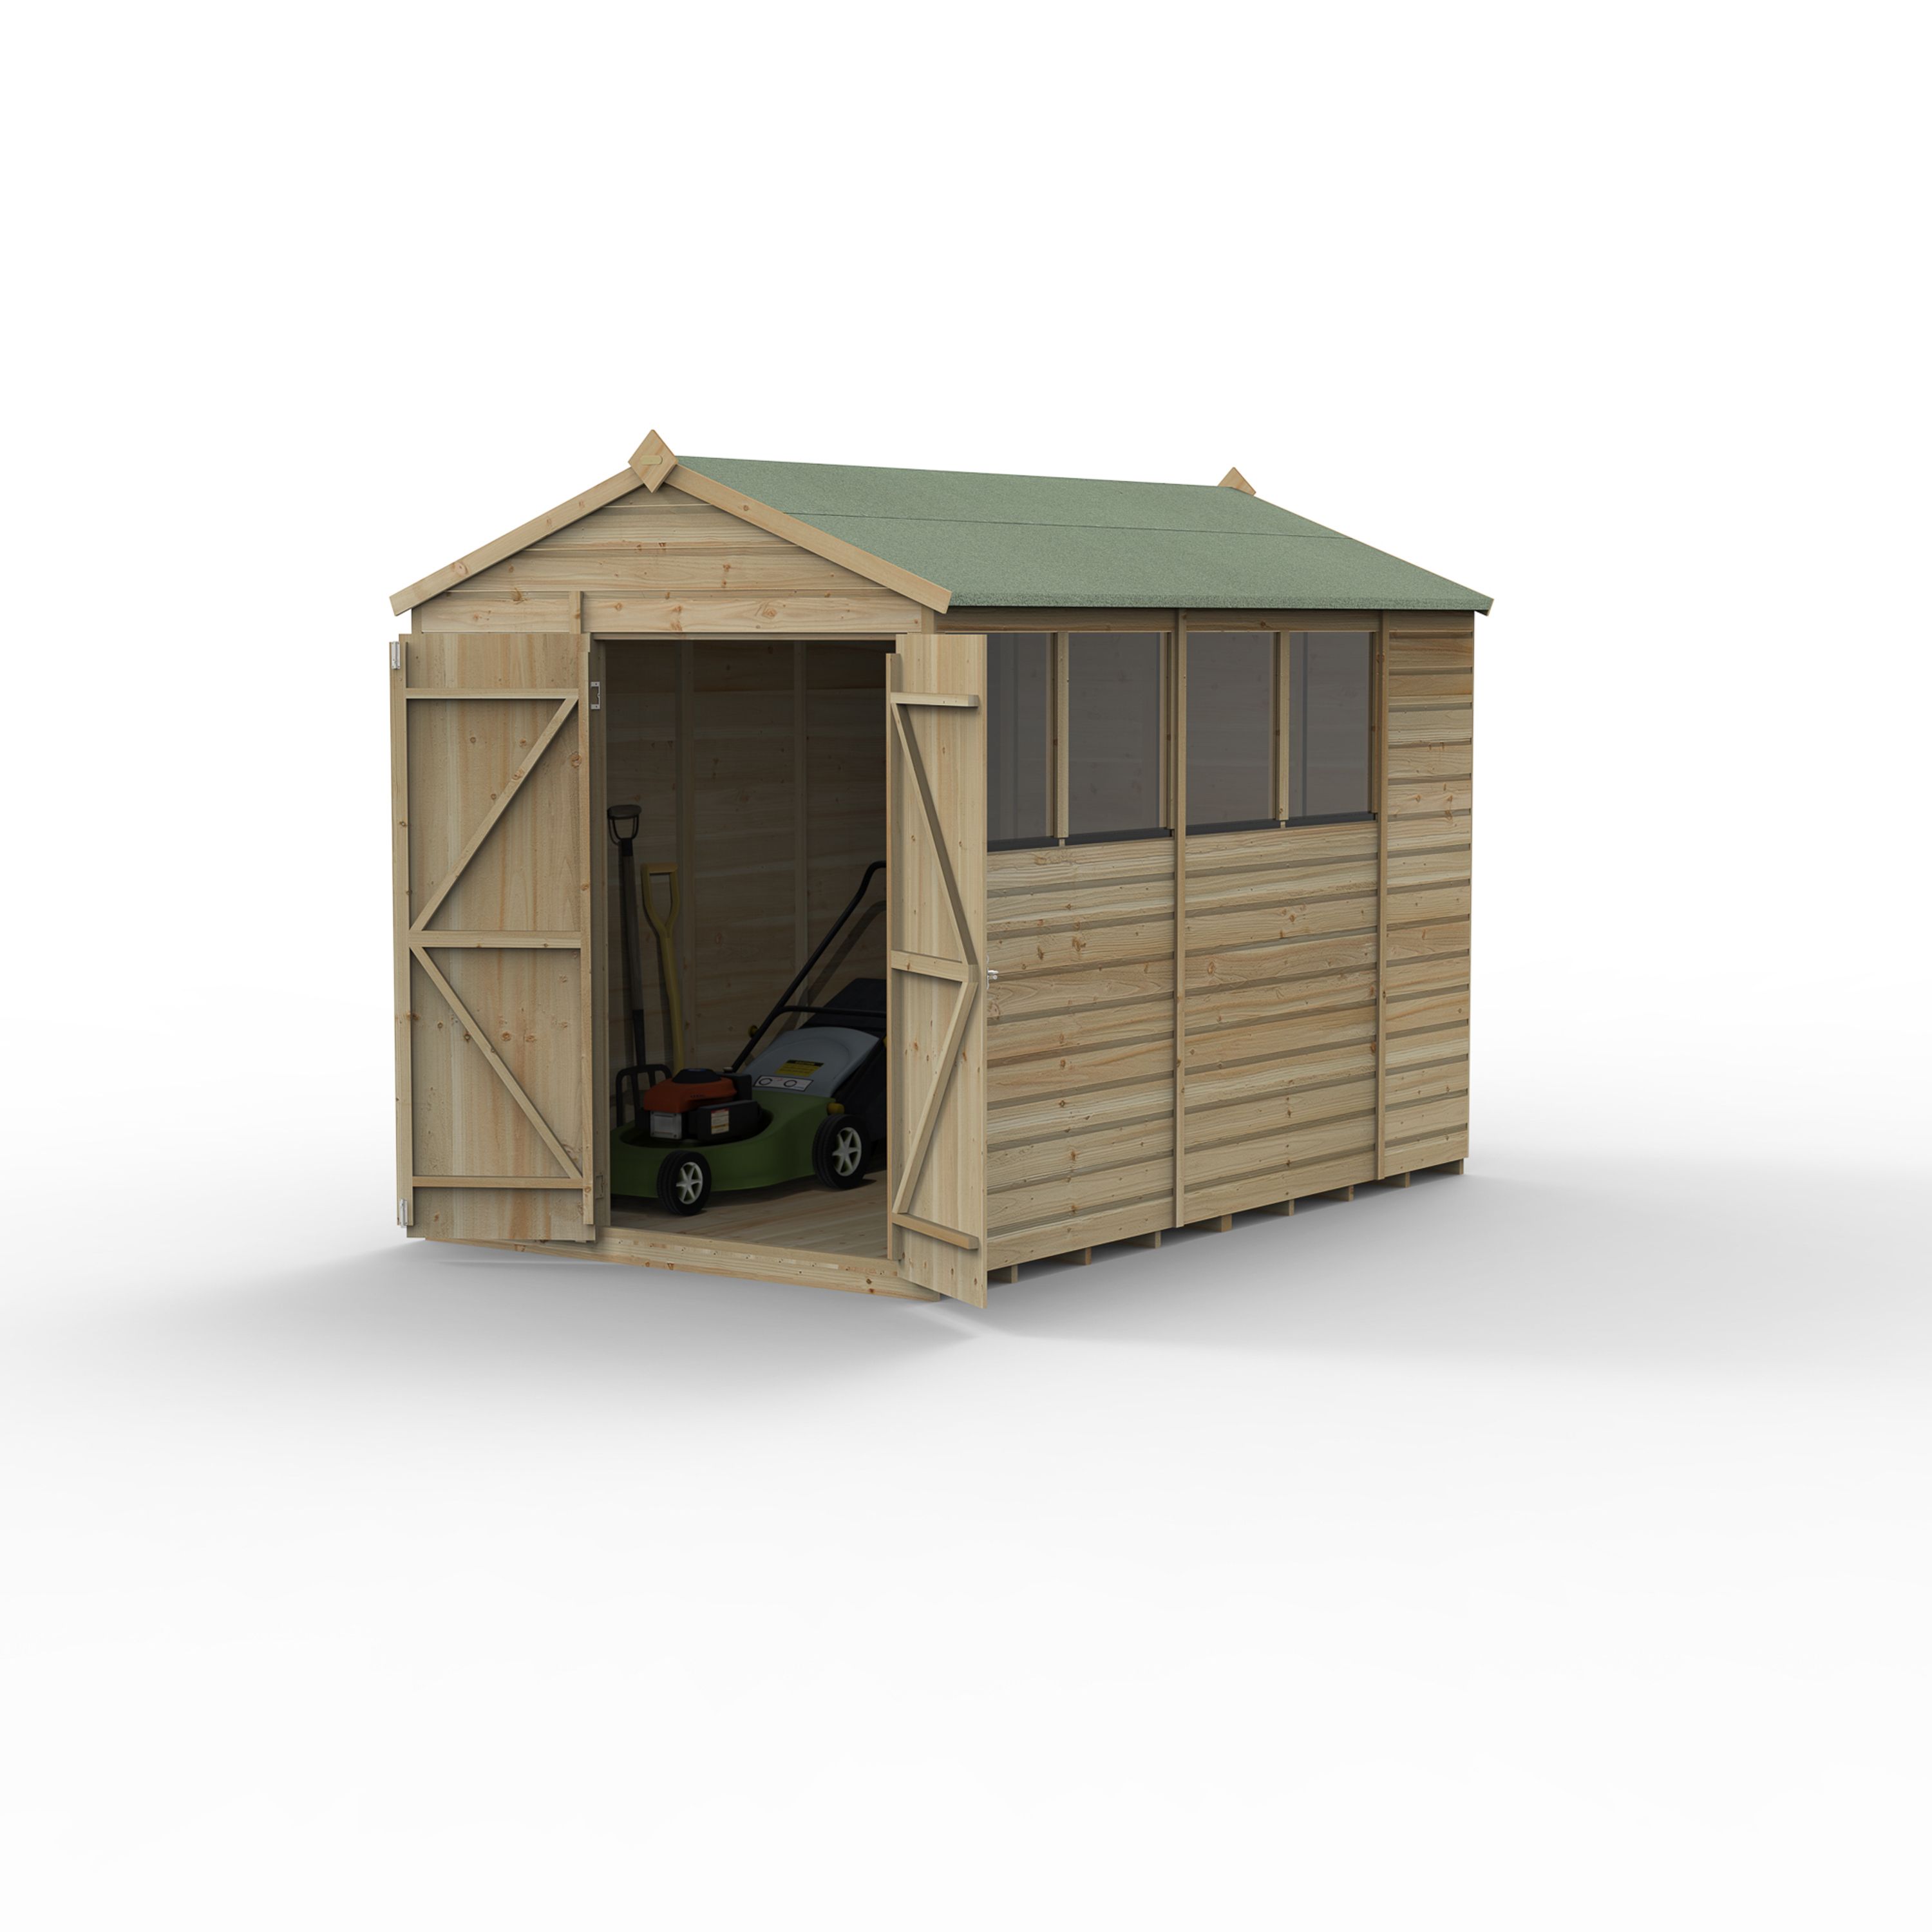 Forest Garden Beckwood 10x6 ft Apex Natural timber Wooden 2 door Shed with floor & 4 windows - Assembly not required